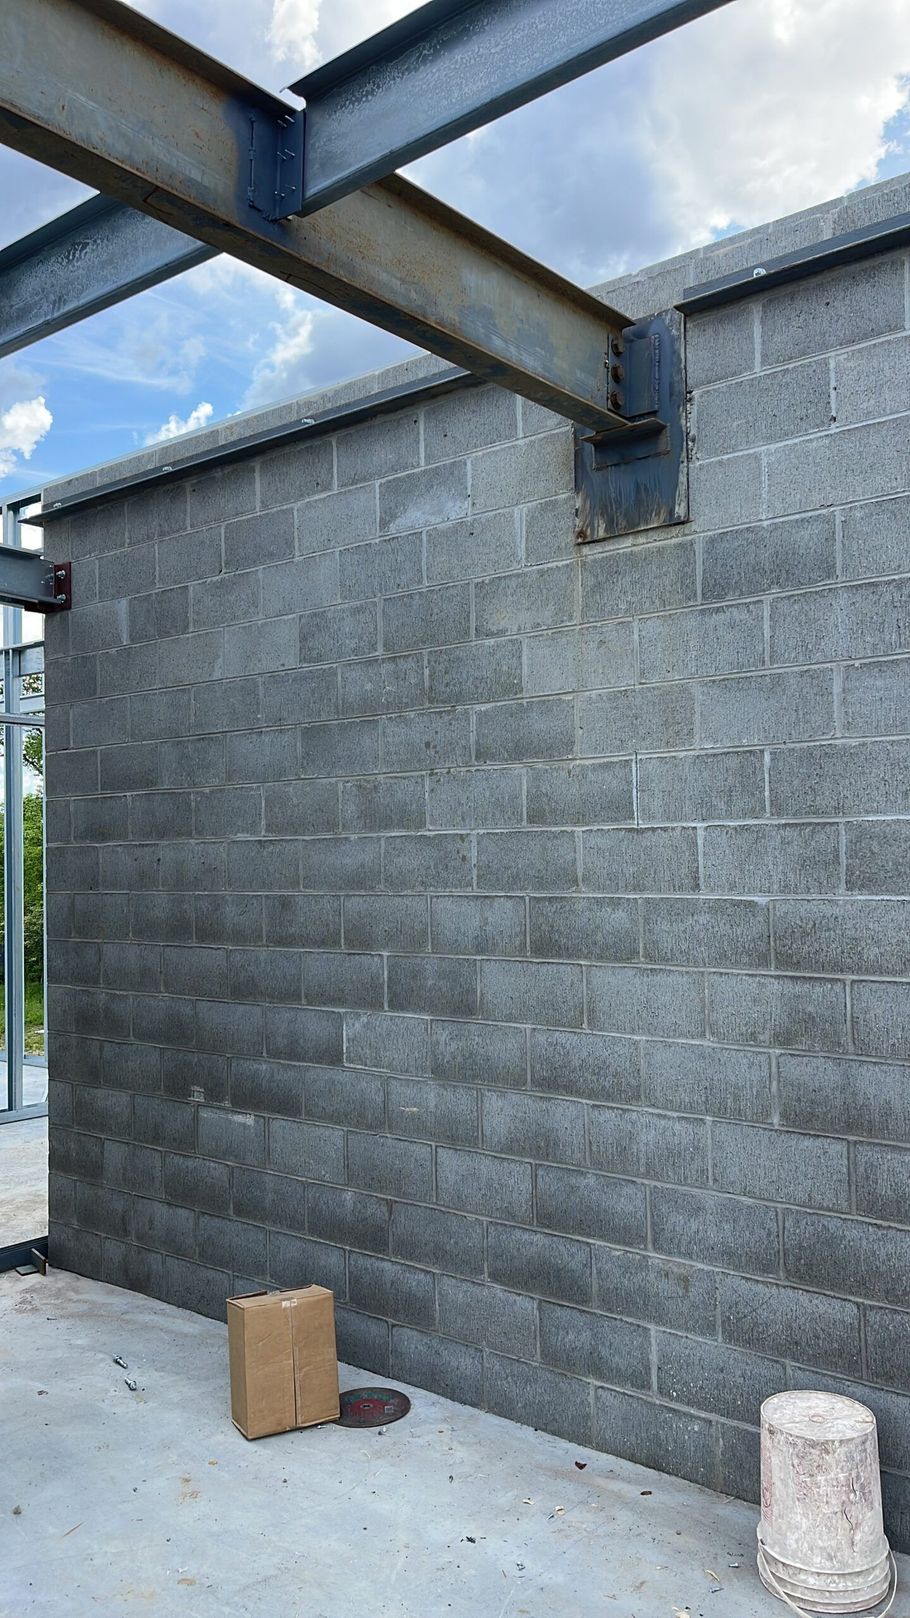 A brick wall with a metal structure behind it is under construction.